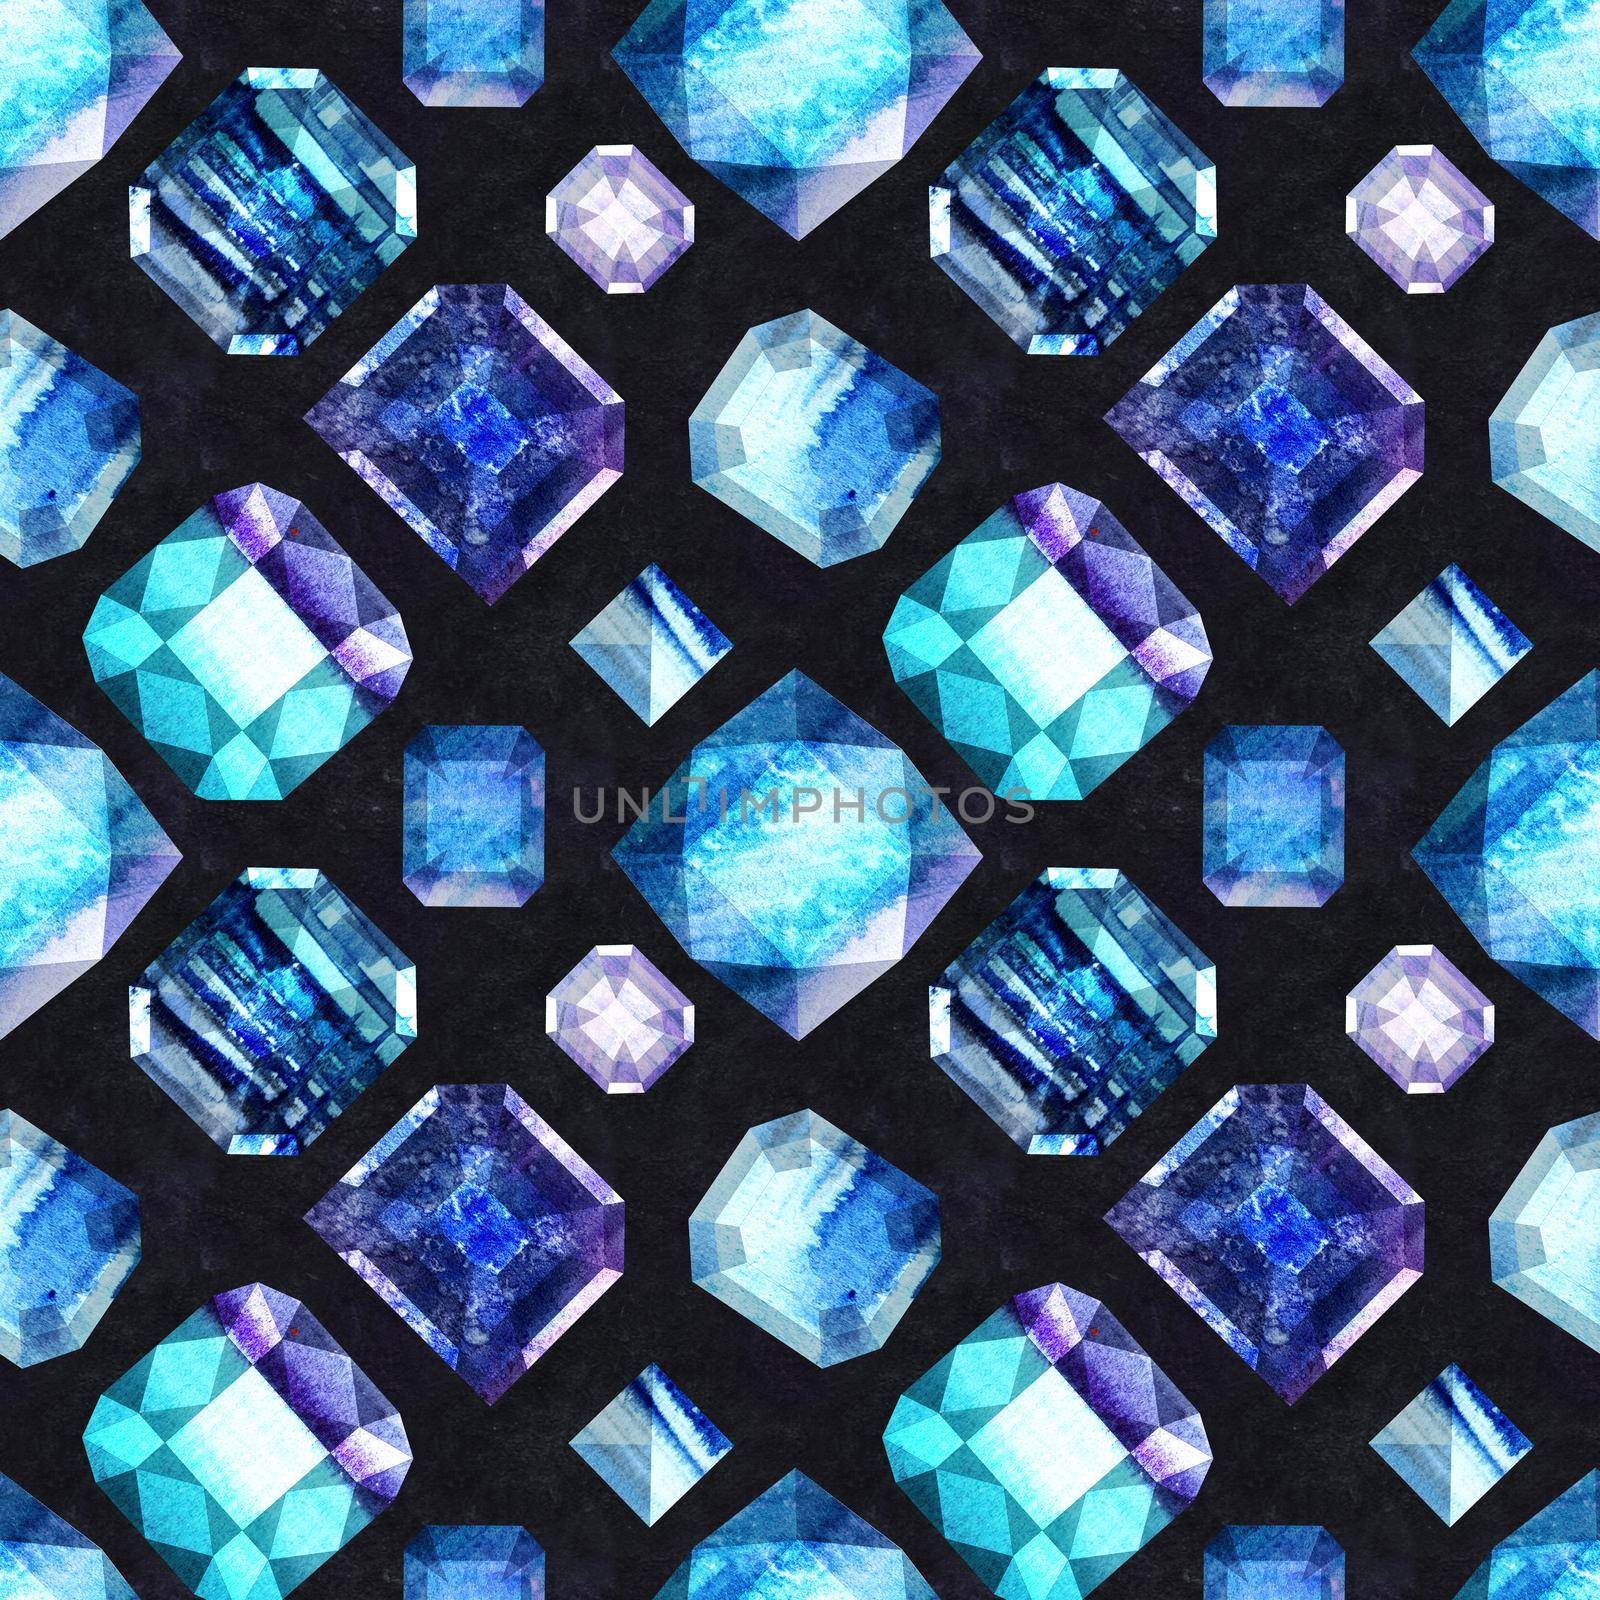 Watercolor gems seamless pattern, blue and violet colors